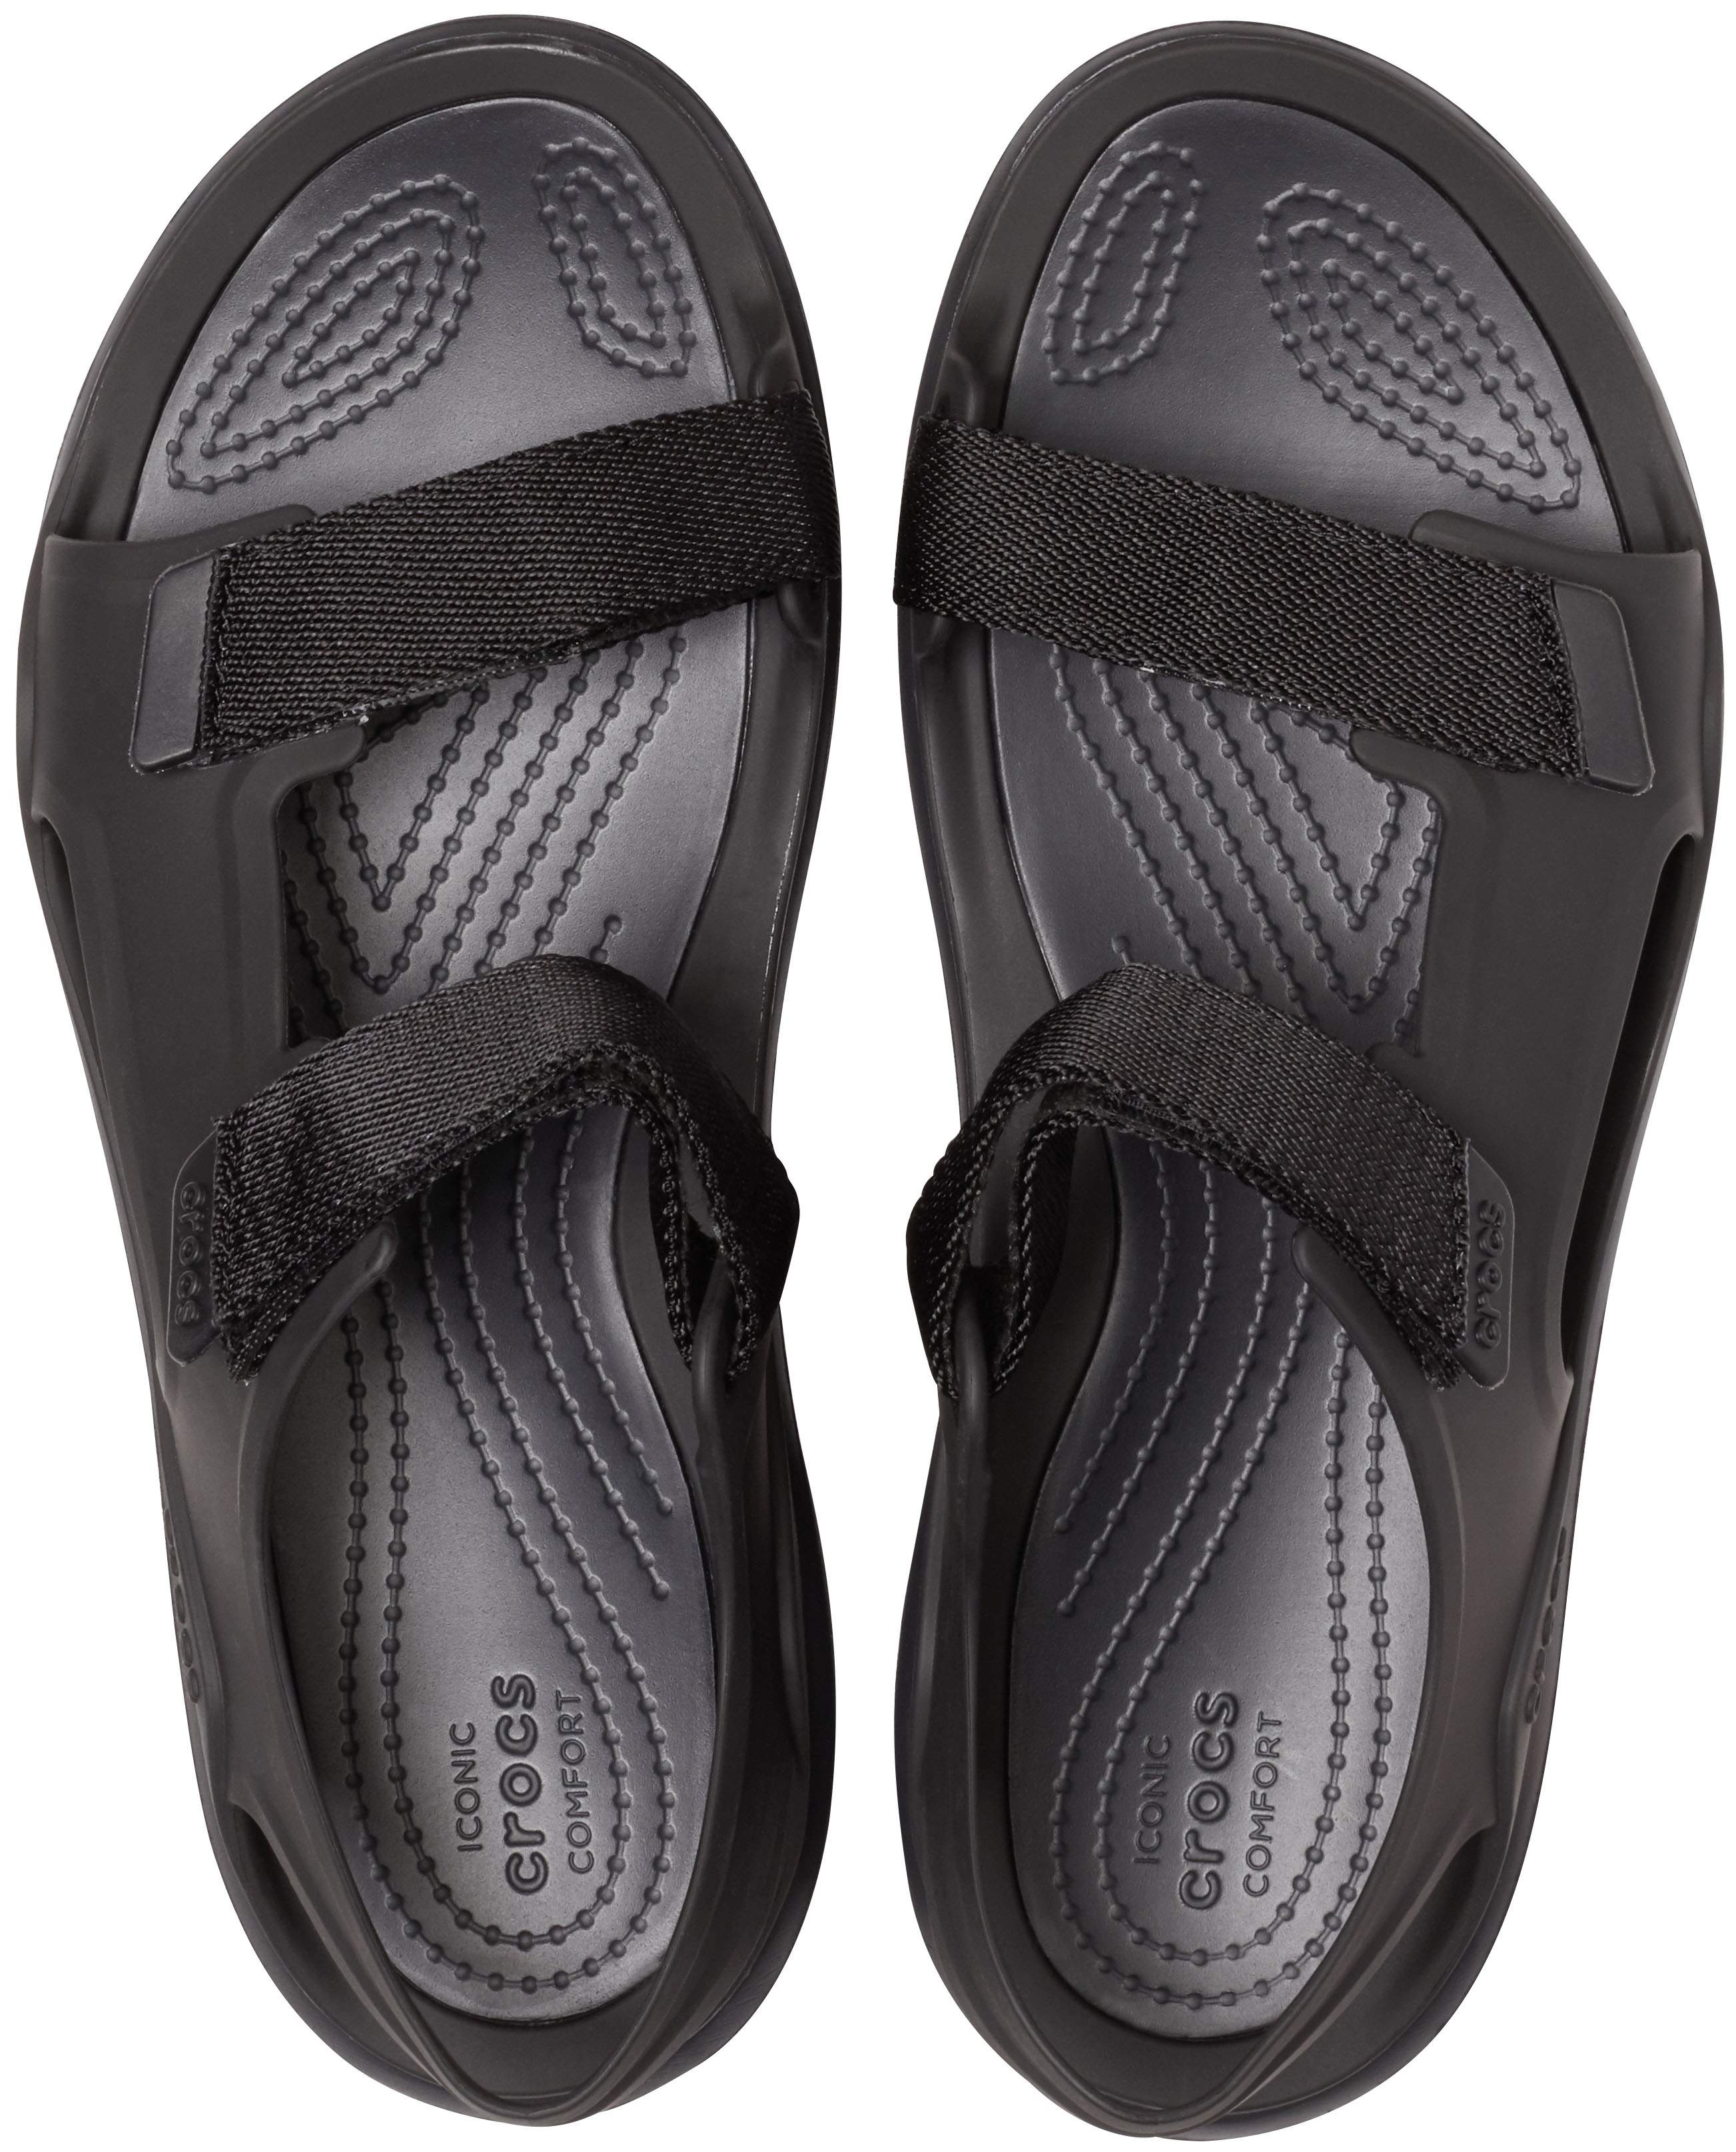 crocs swiftwater expedition sandal